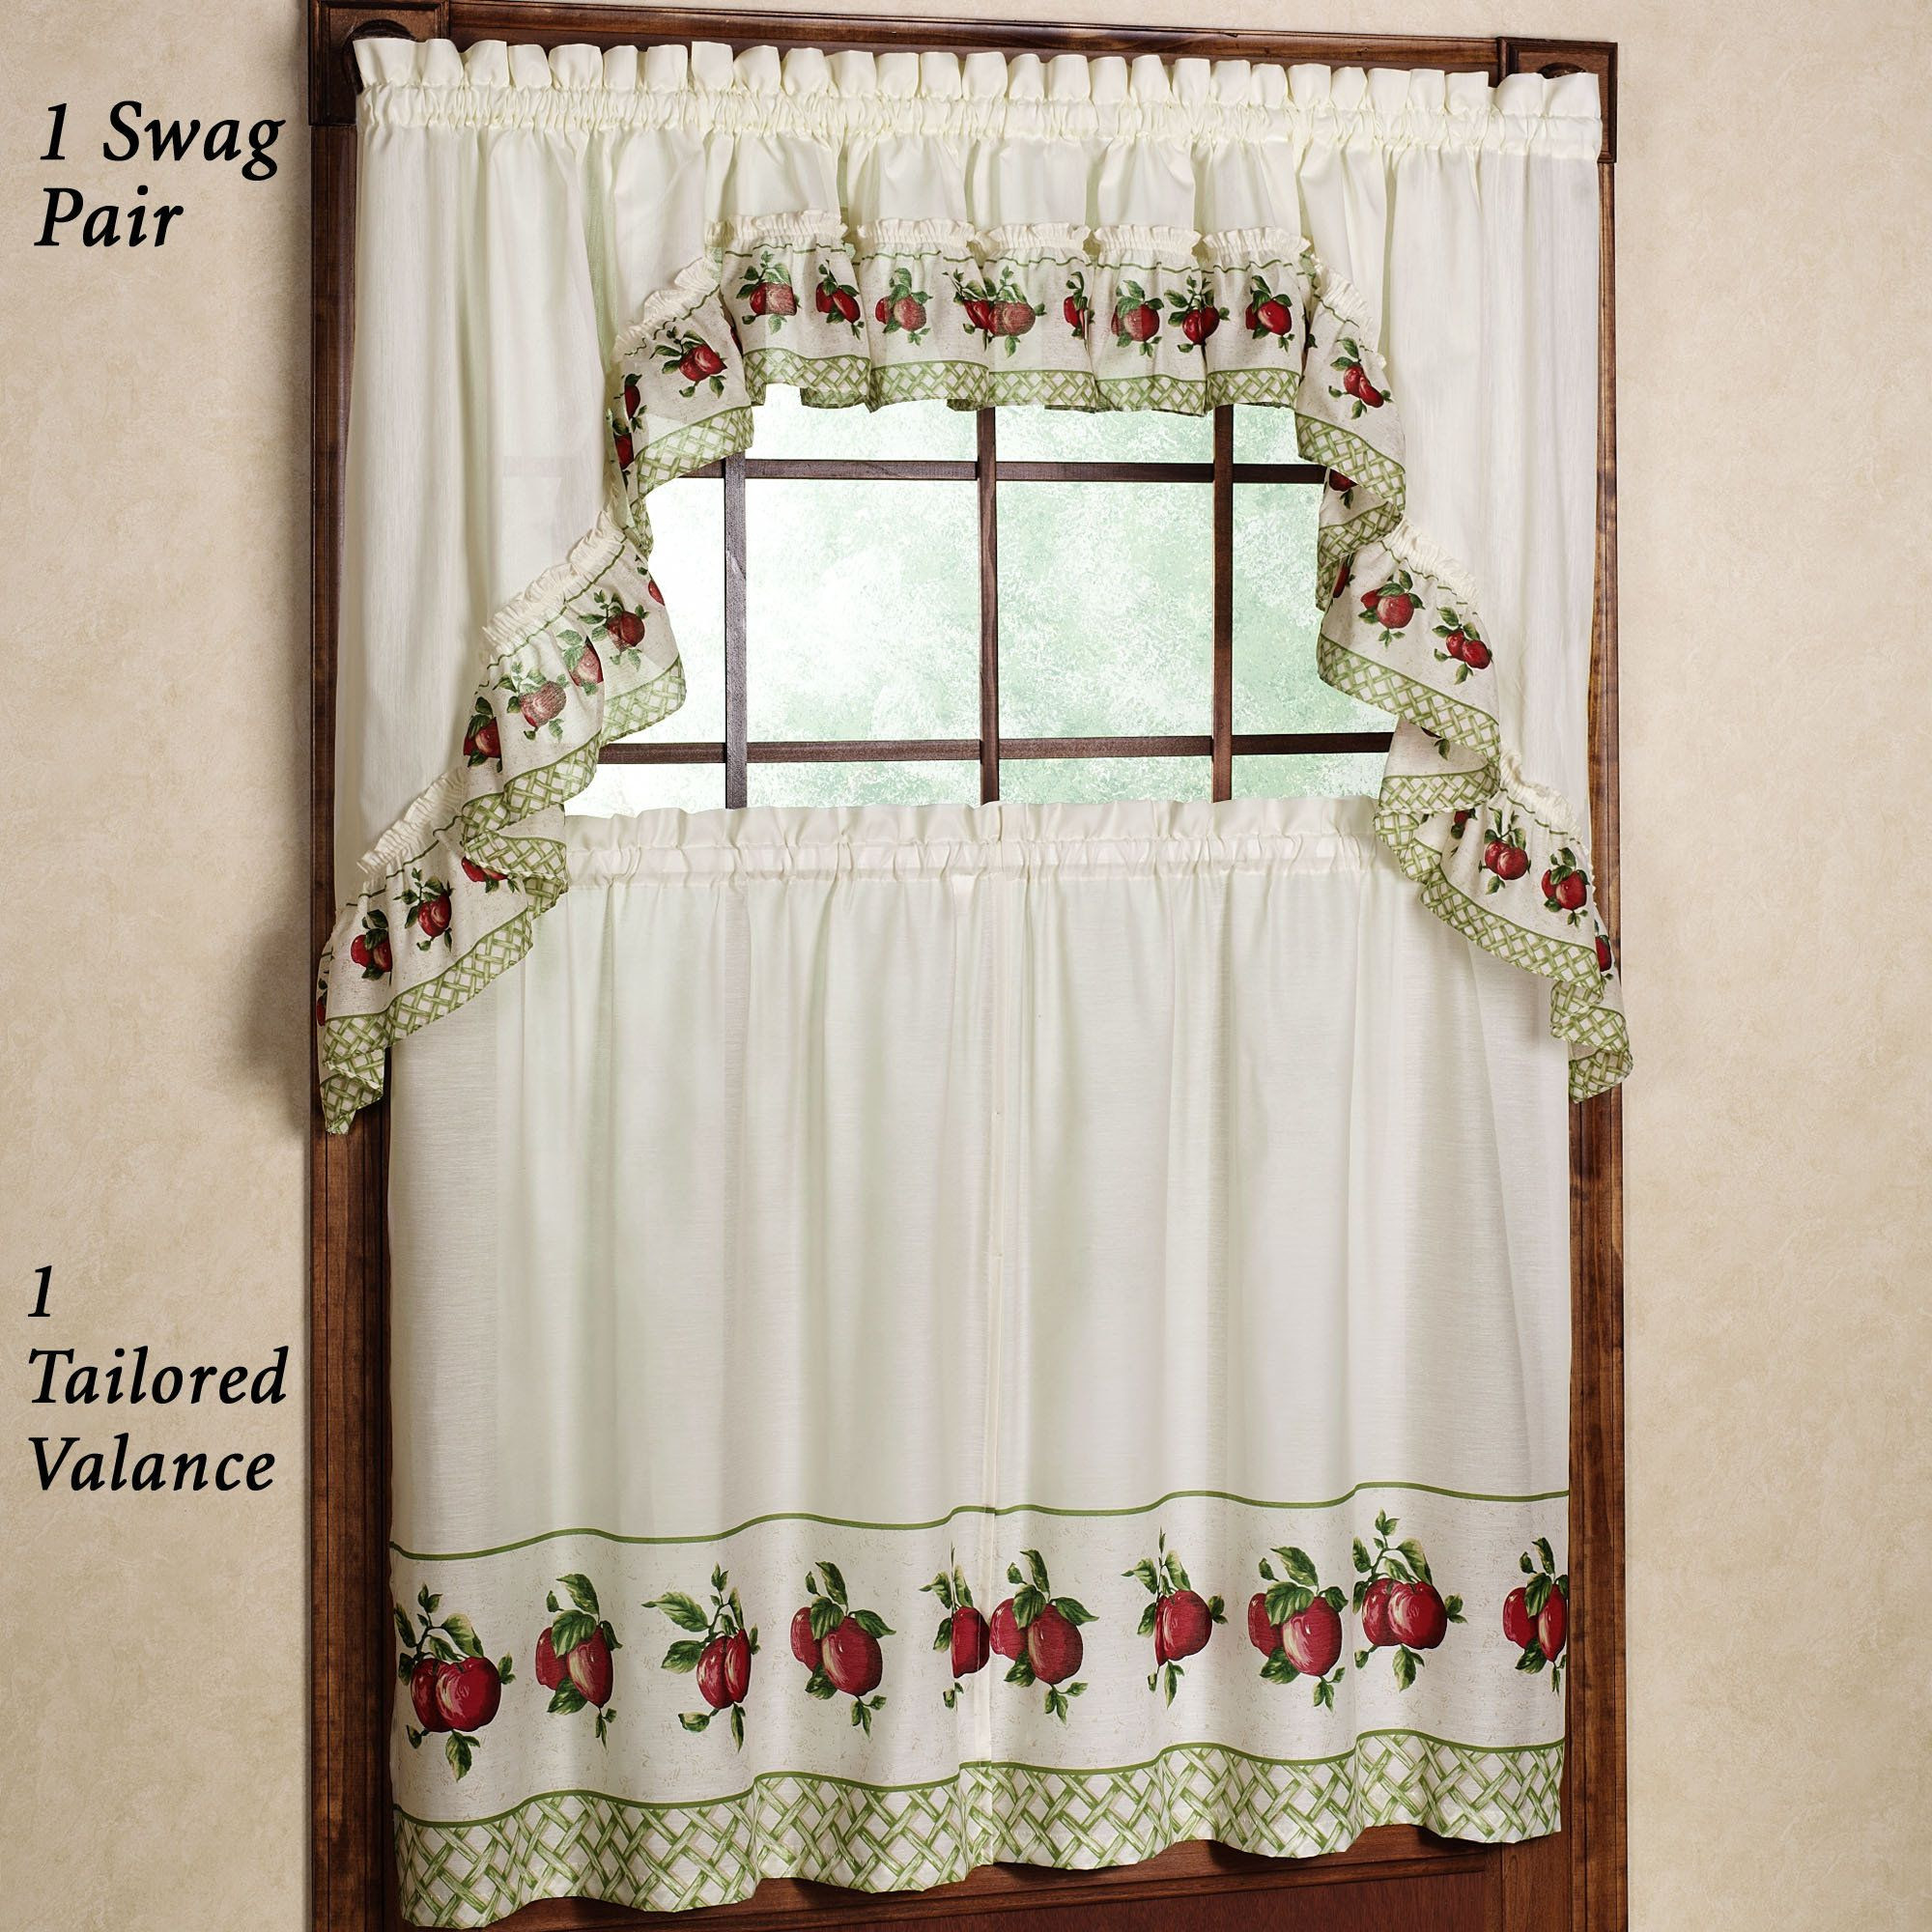 Jcpenney Curtains Kitchen
 Curtain Elegant Interior Home Decorating Ideas With